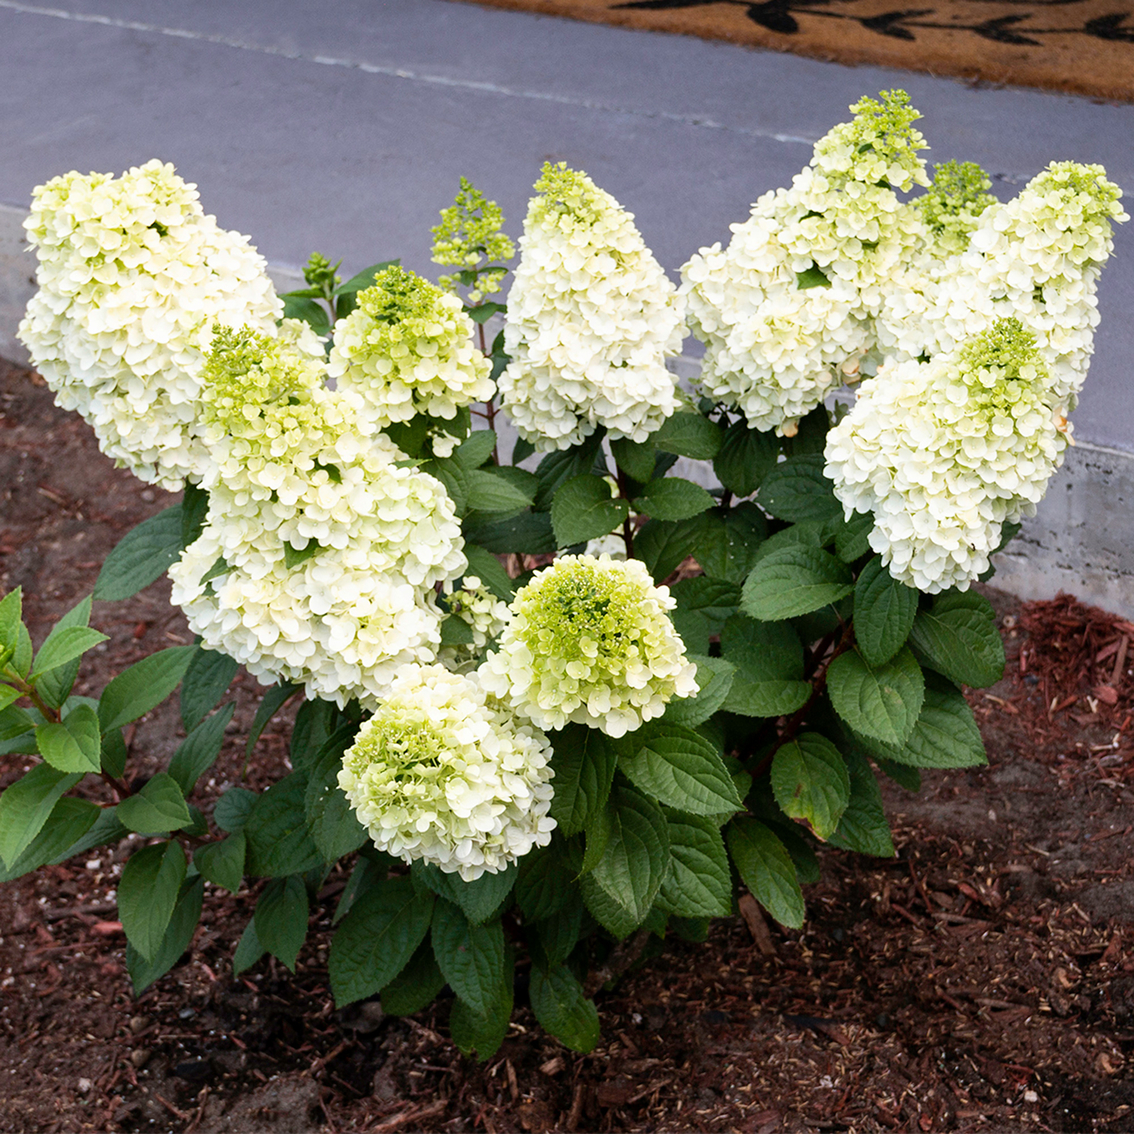 Image of Hydrangea moonrock plant in a pot